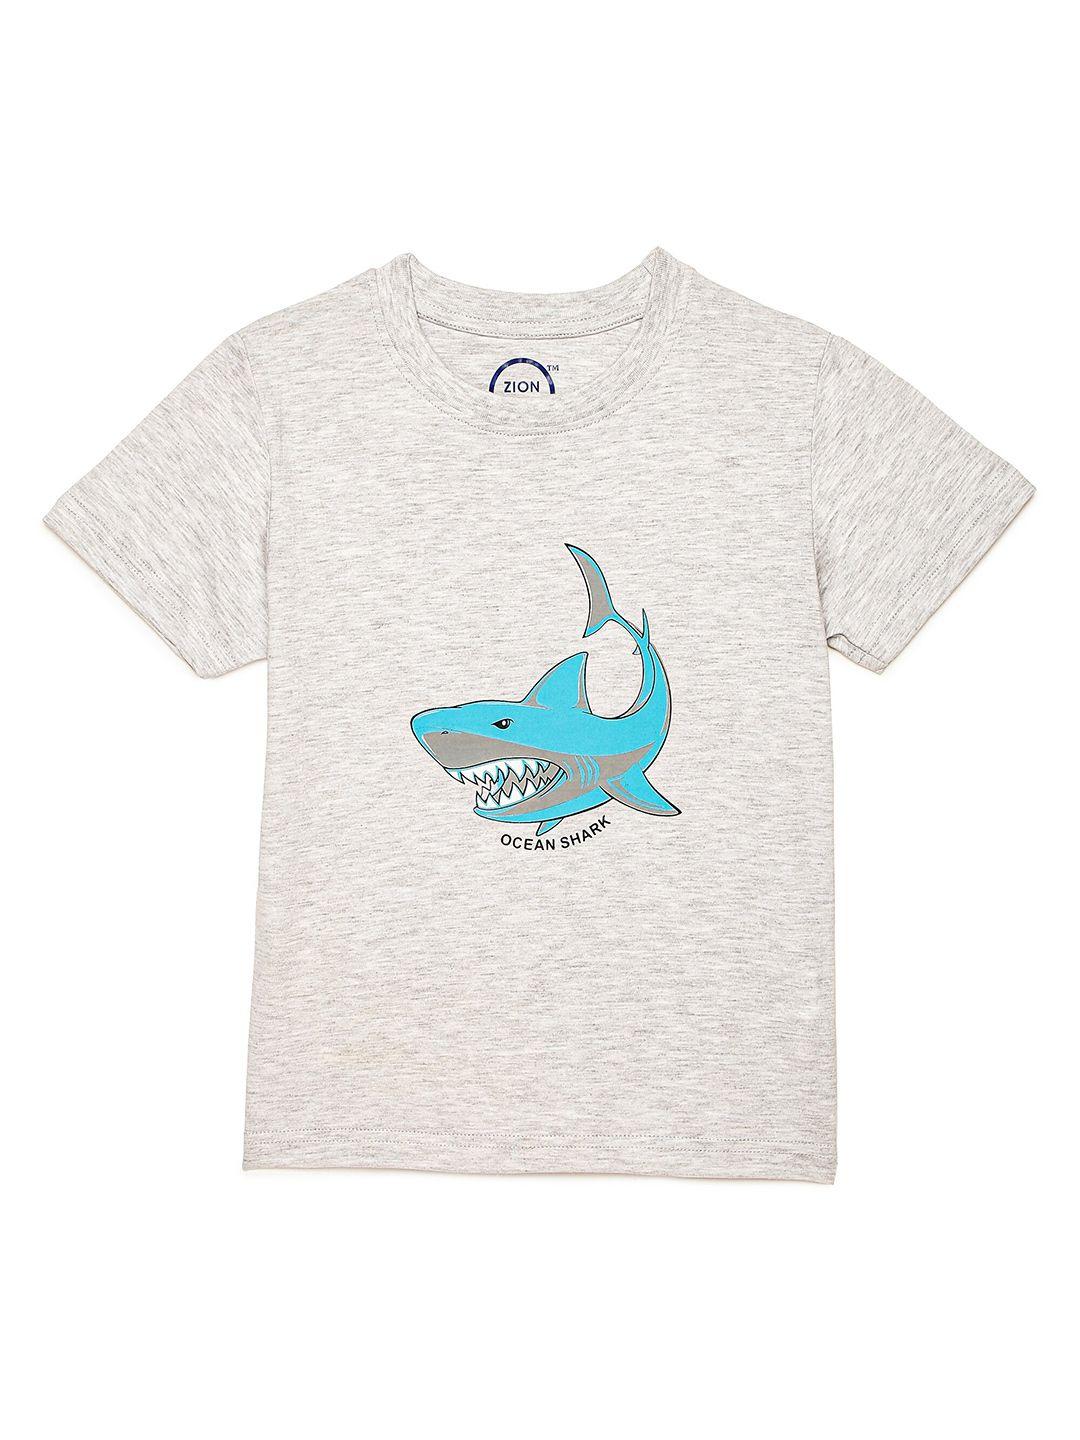 zion boys white and blue graphic printed t-shirt